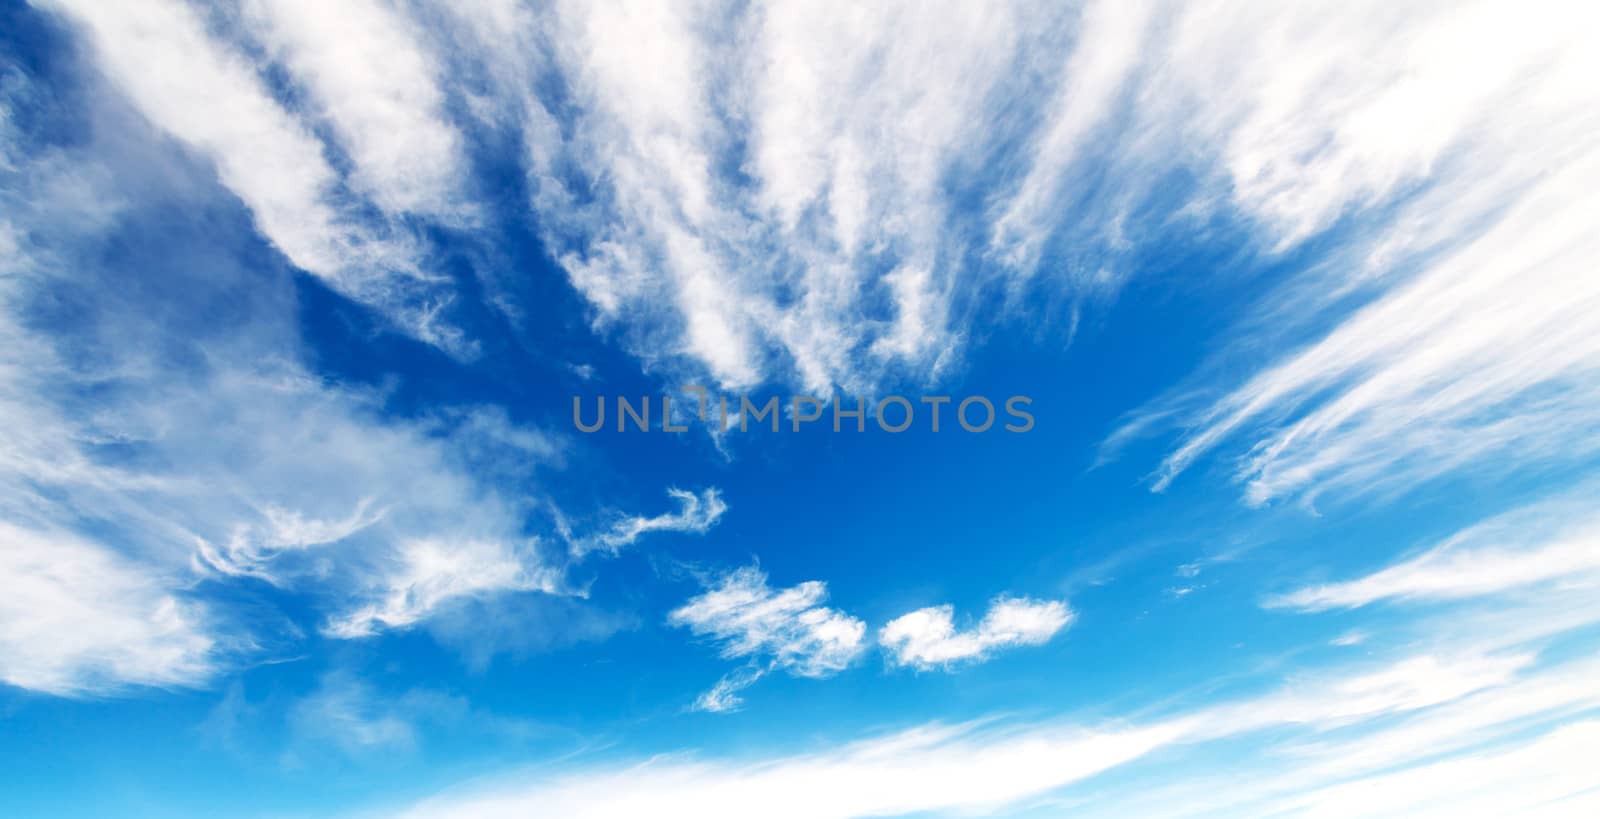 clouds in the blue sky  by jame_j@homail.com